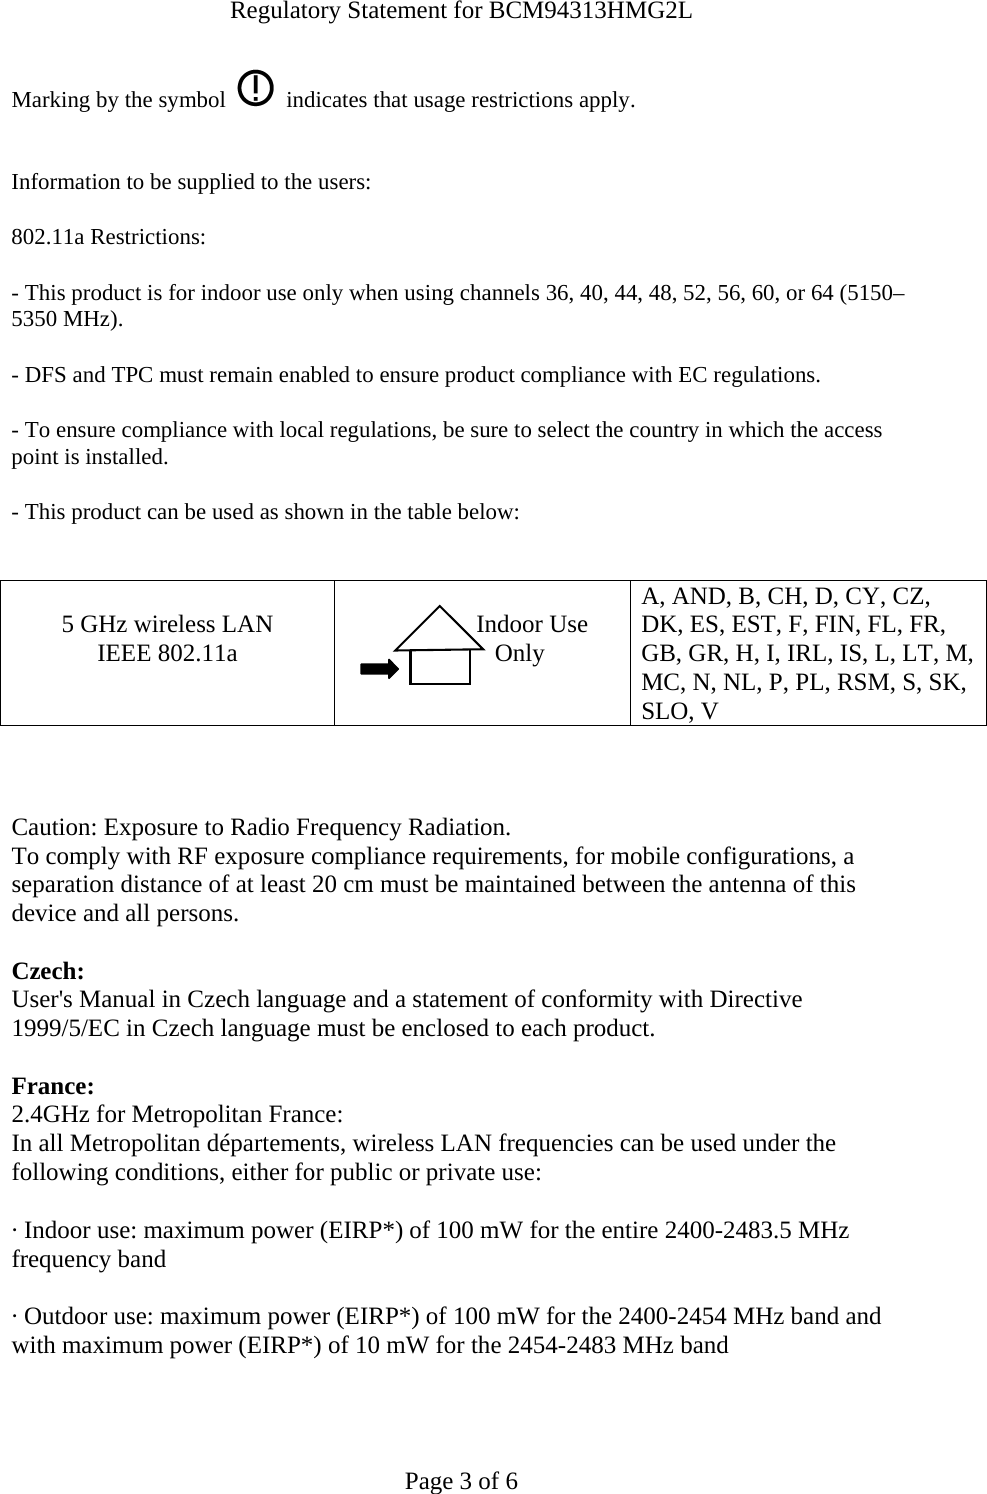 Regulatory Statement for BCM94313HMG2L  Page 3 of 6 Marking by the symbol     indicates that usage restrictions apply.  Information to be supplied to the users: 802.11a Restrictions: - This product is for indoor use only when using channels 36, 40, 44, 48, 52, 56, 60, or 64 (5150–5350 MHz).       - DFS and TPC must remain enabled to ensure product compliance with EC regulations.      - To ensure compliance with local regulations, be sure to select the country in which the access point is installed. - This product can be used as shown in the table below:   5 GHz wireless LAN IEEE 802.11a                  Indoor Use             Only  A, AND, B, CH, D, CY, CZ, DK, ES, EST, F, FIN, FL, FR, GB, GR, H, I, IRL, IS, L, LT, M, MC, N, NL, P, PL, RSM, S, SK, SLO, V    Caution: Exposure to Radio Frequency Radiation.   To comply with RF exposure compliance requirements, for mobile configurations, a separation distance of at least 20 cm must be maintained between the antenna of this device and all persons.  Czech:  User&apos;s Manual in Czech language and a statement of conformity with Directive 1999/5/EC in Czech language must be enclosed to each product.   France: 2.4GHz for Metropolitan France:   In all Metropolitan départements, wireless LAN frequencies can be used under the following conditions, either for public or private use:  · Indoor use: maximum power (EIRP*) of 100 mW for the entire 2400-2483.5 MHz frequency band · Outdoor use: maximum power (EIRP*) of 100 mW for the 2400-2454 MHz band and with maximum power (EIRP*) of 10 mW for the 2454-2483 MHz band  